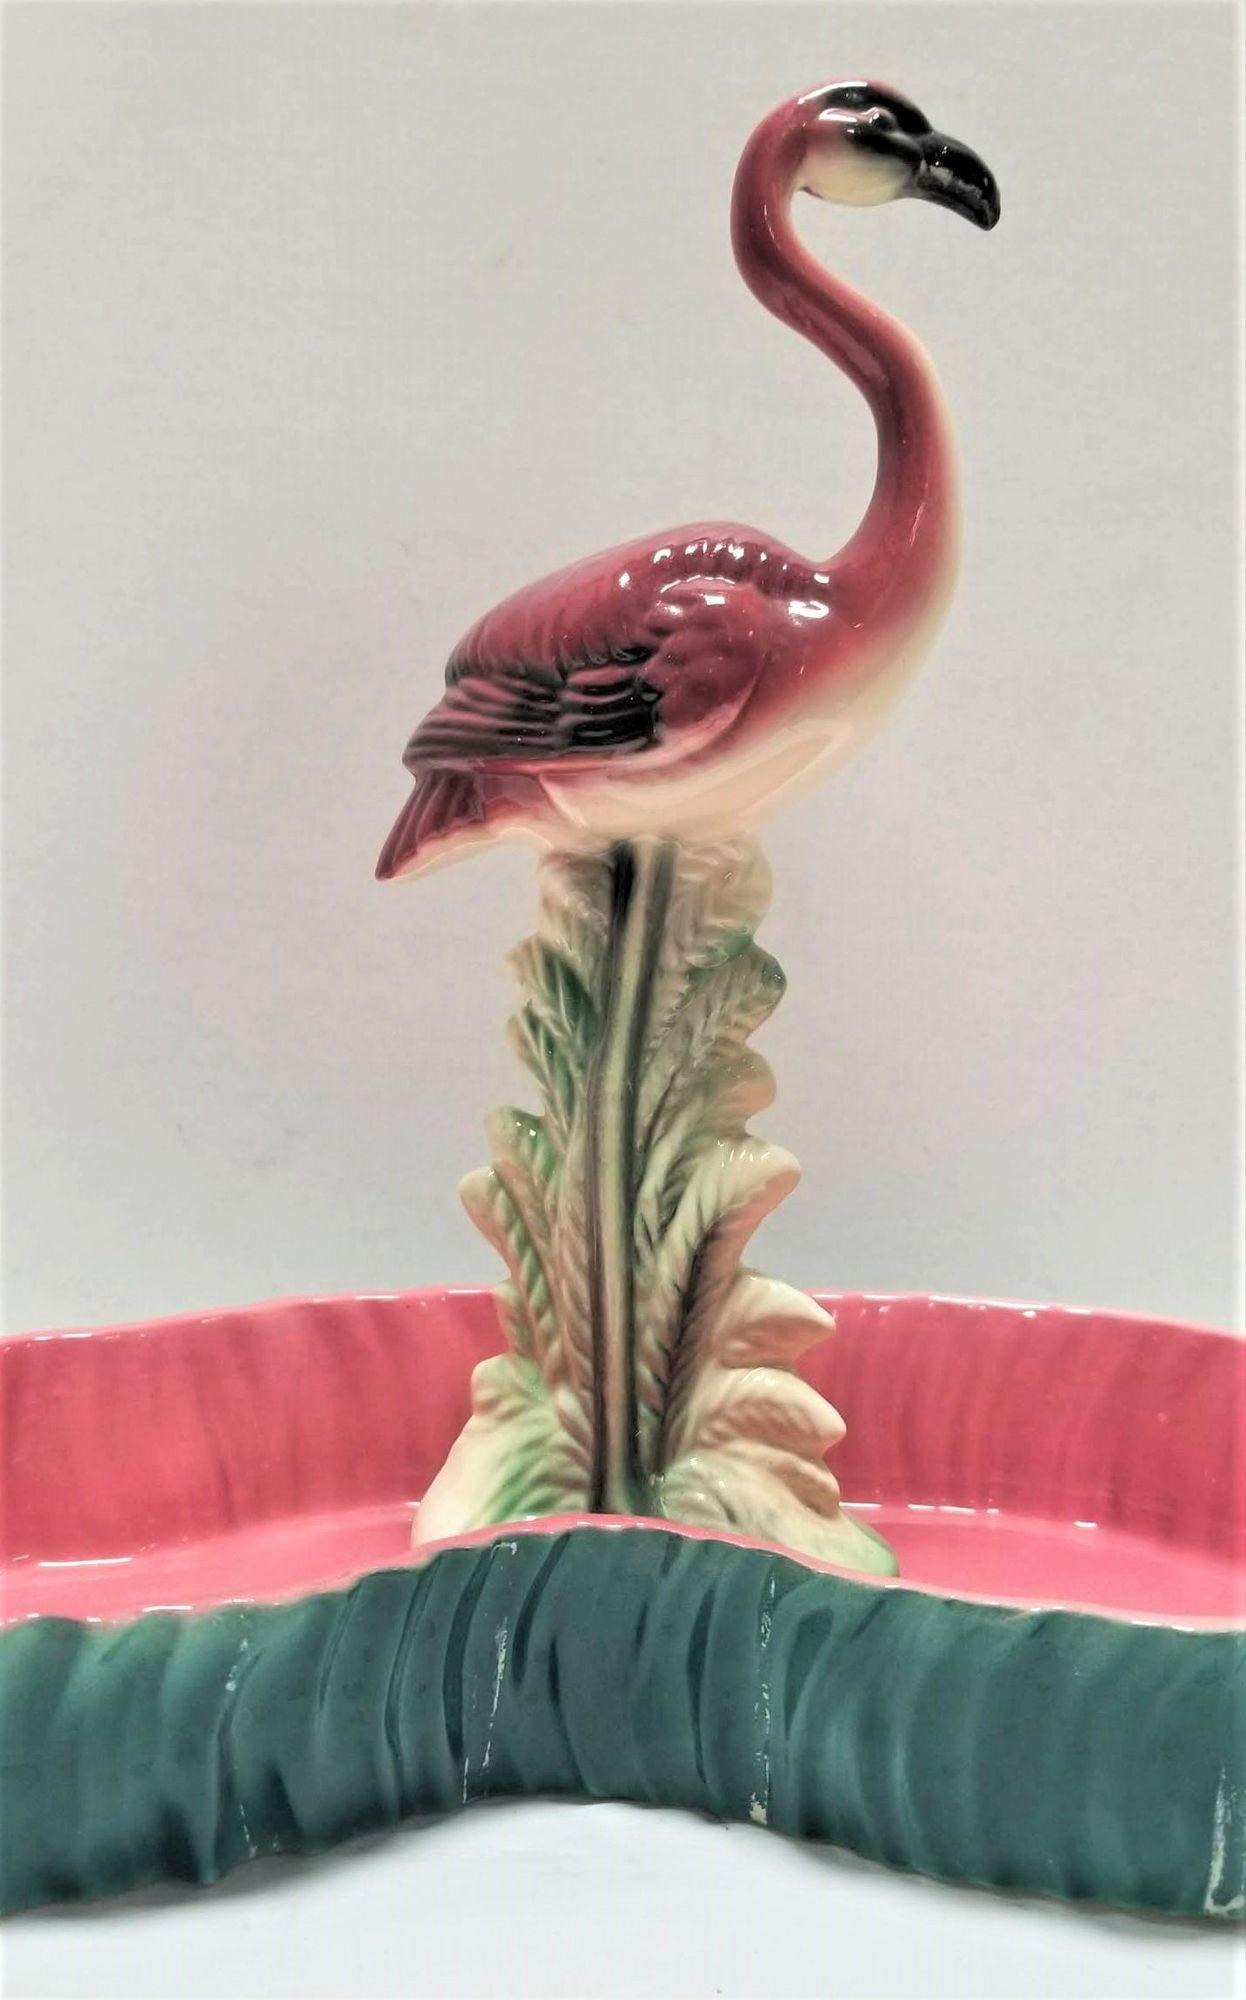 Mid Century pink and green flamingo ceramic figurine in flamingo pool tray decorative bowl.
Maddux of California was a ceramics company that operated in California from the 1930s to the 1970s. They produced a wide range of ceramic items, including